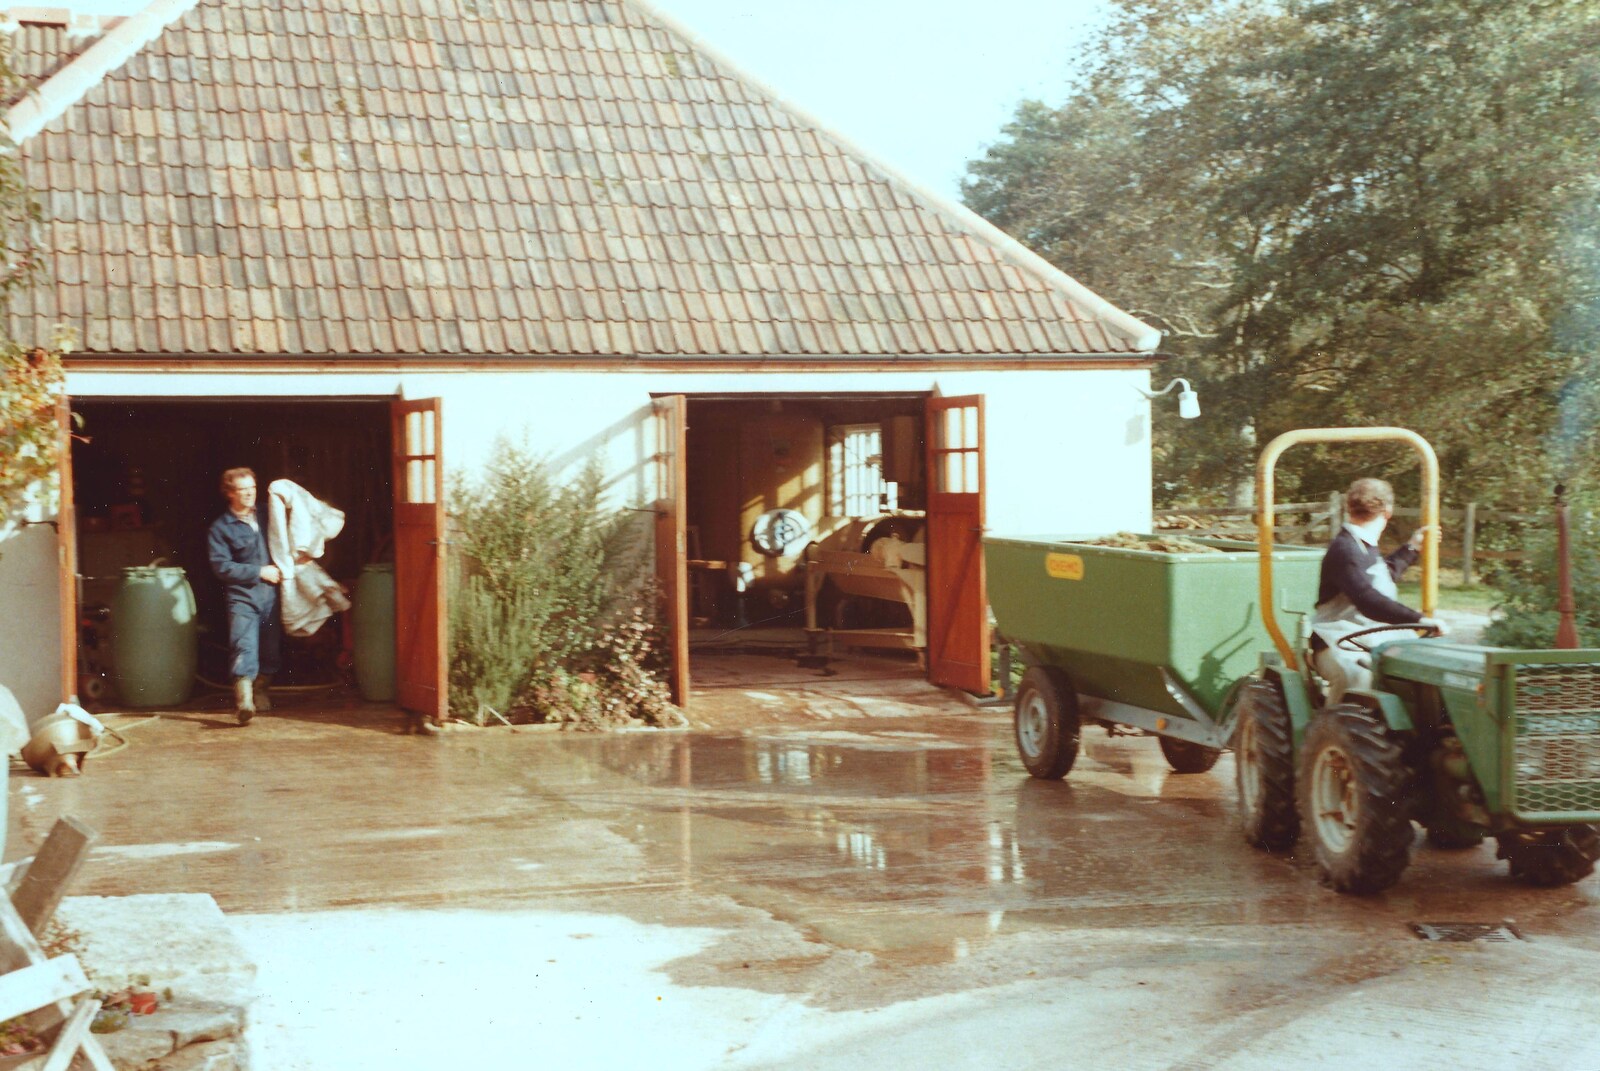 The grapes are unloaded at Wootton Vineyard from Constructing a Vineyard, Harrow Road, Bransgore, Dorset - 1st September 1981